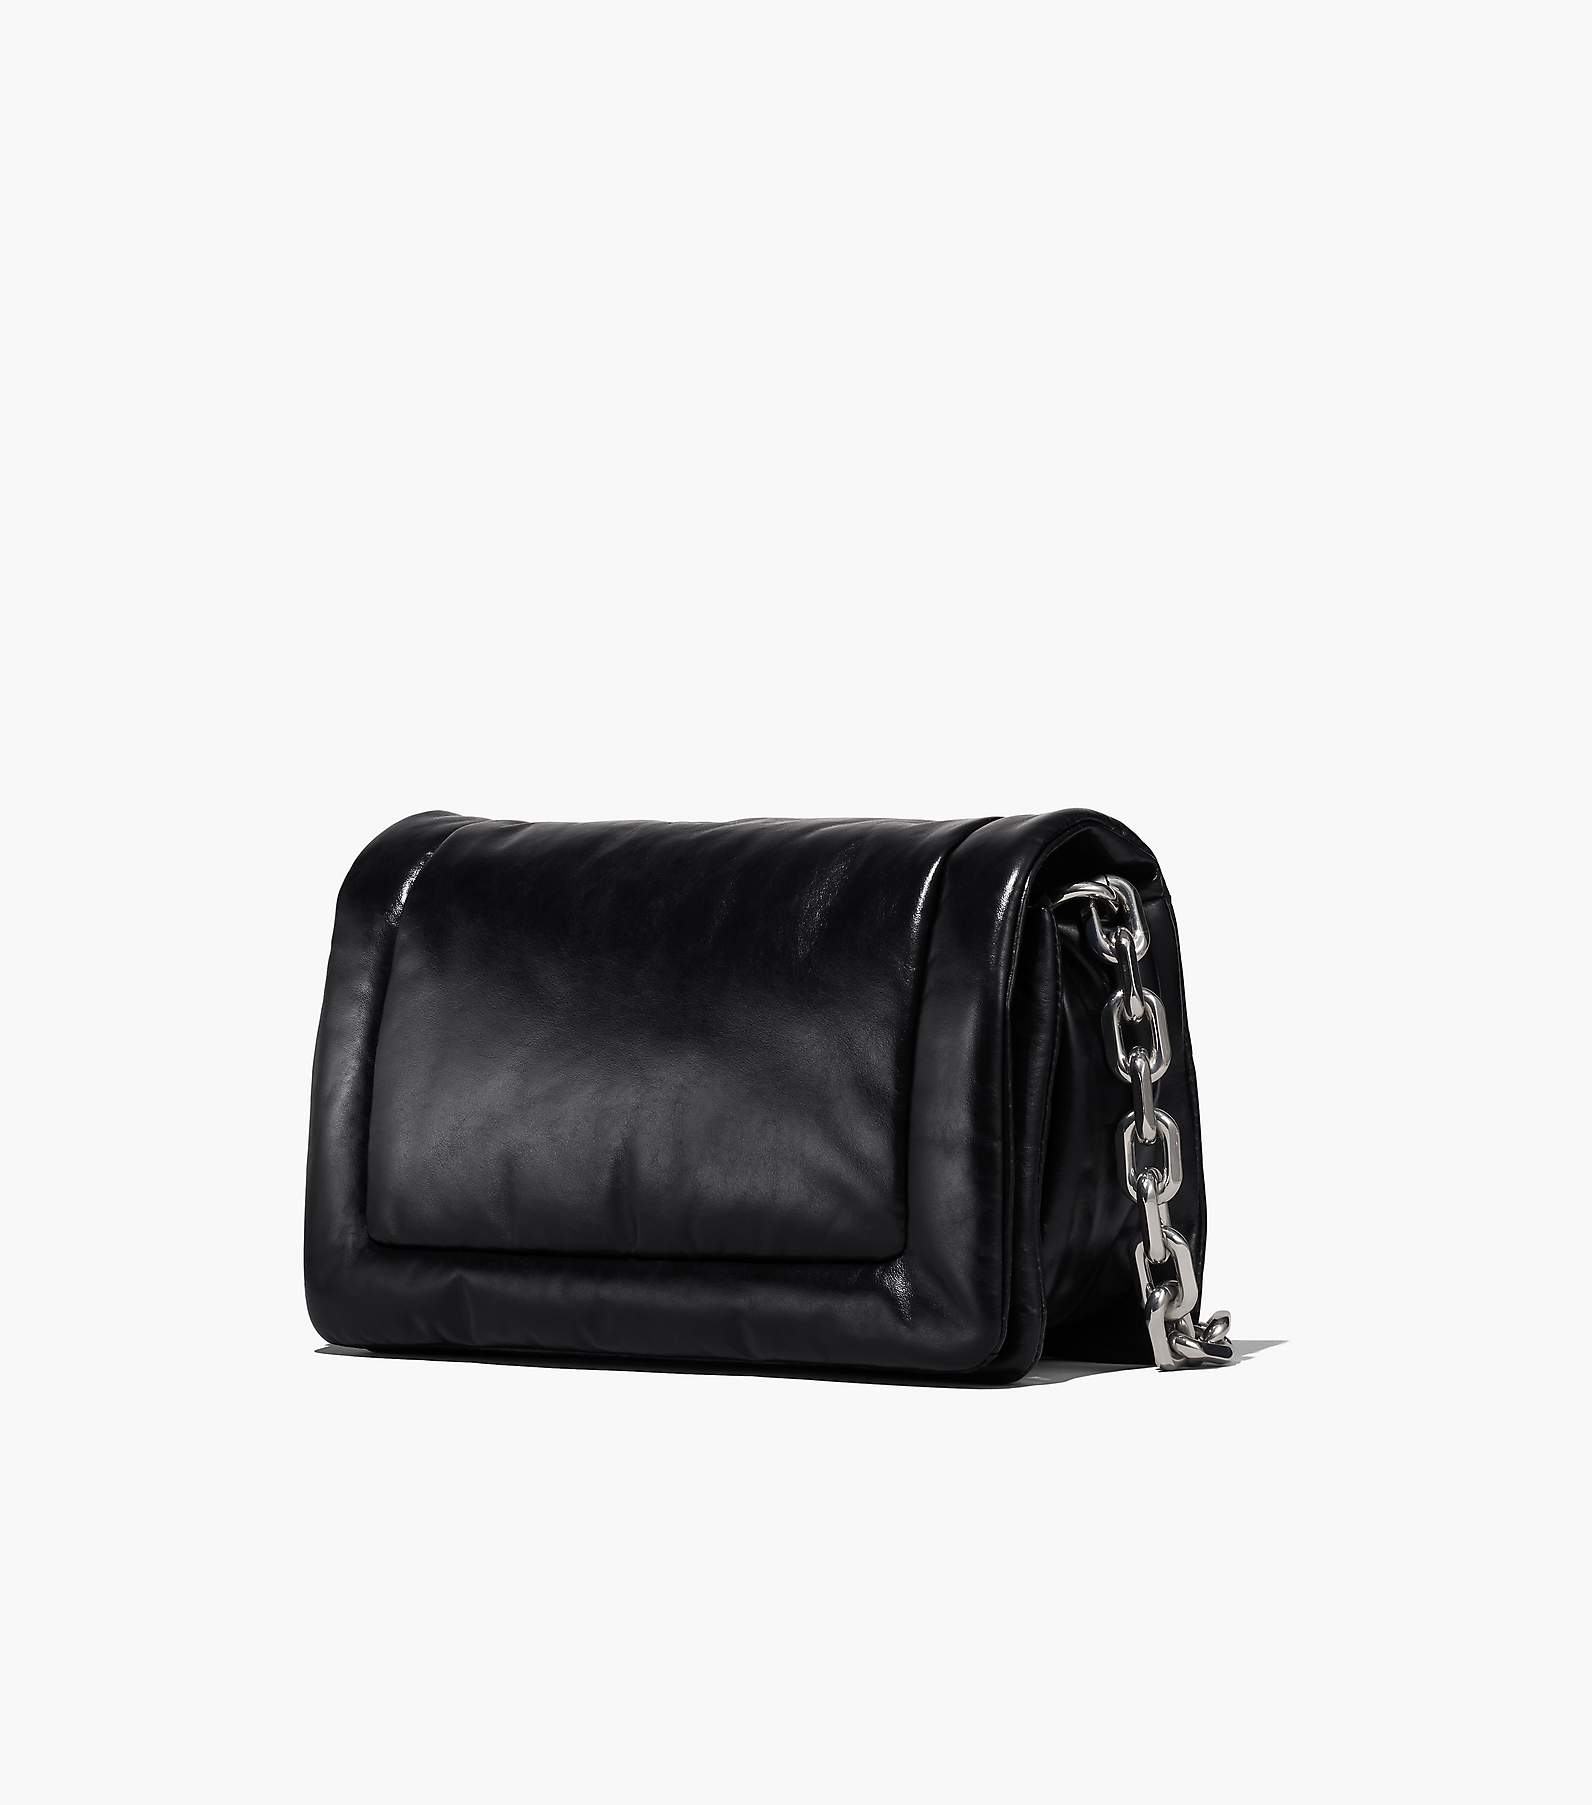 The Marc Jacobs + The Pillow Bag